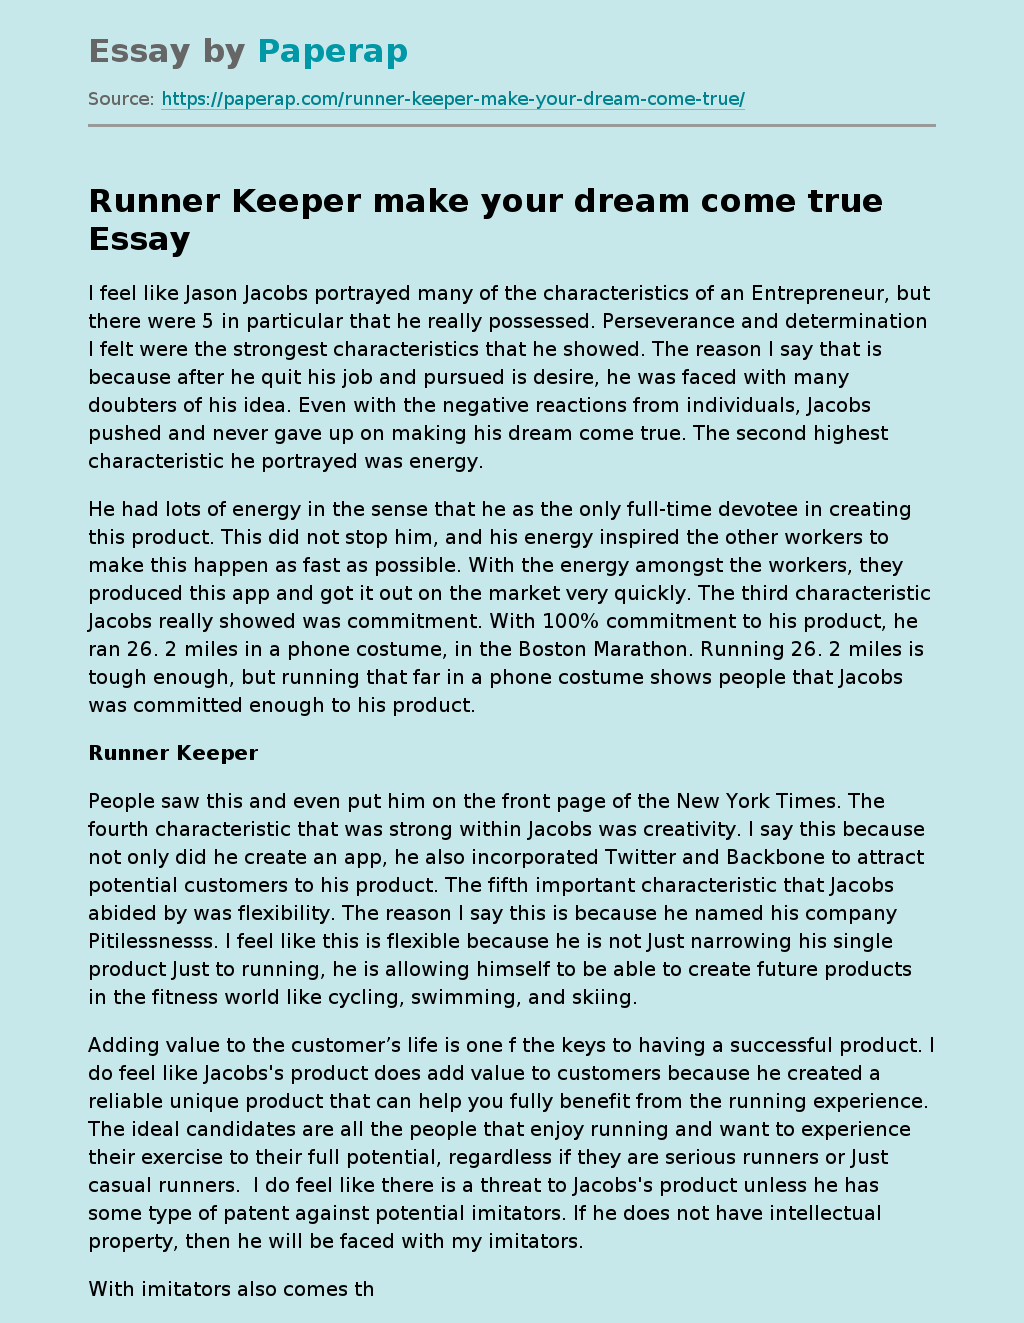 Runner Keeper make your dream come true